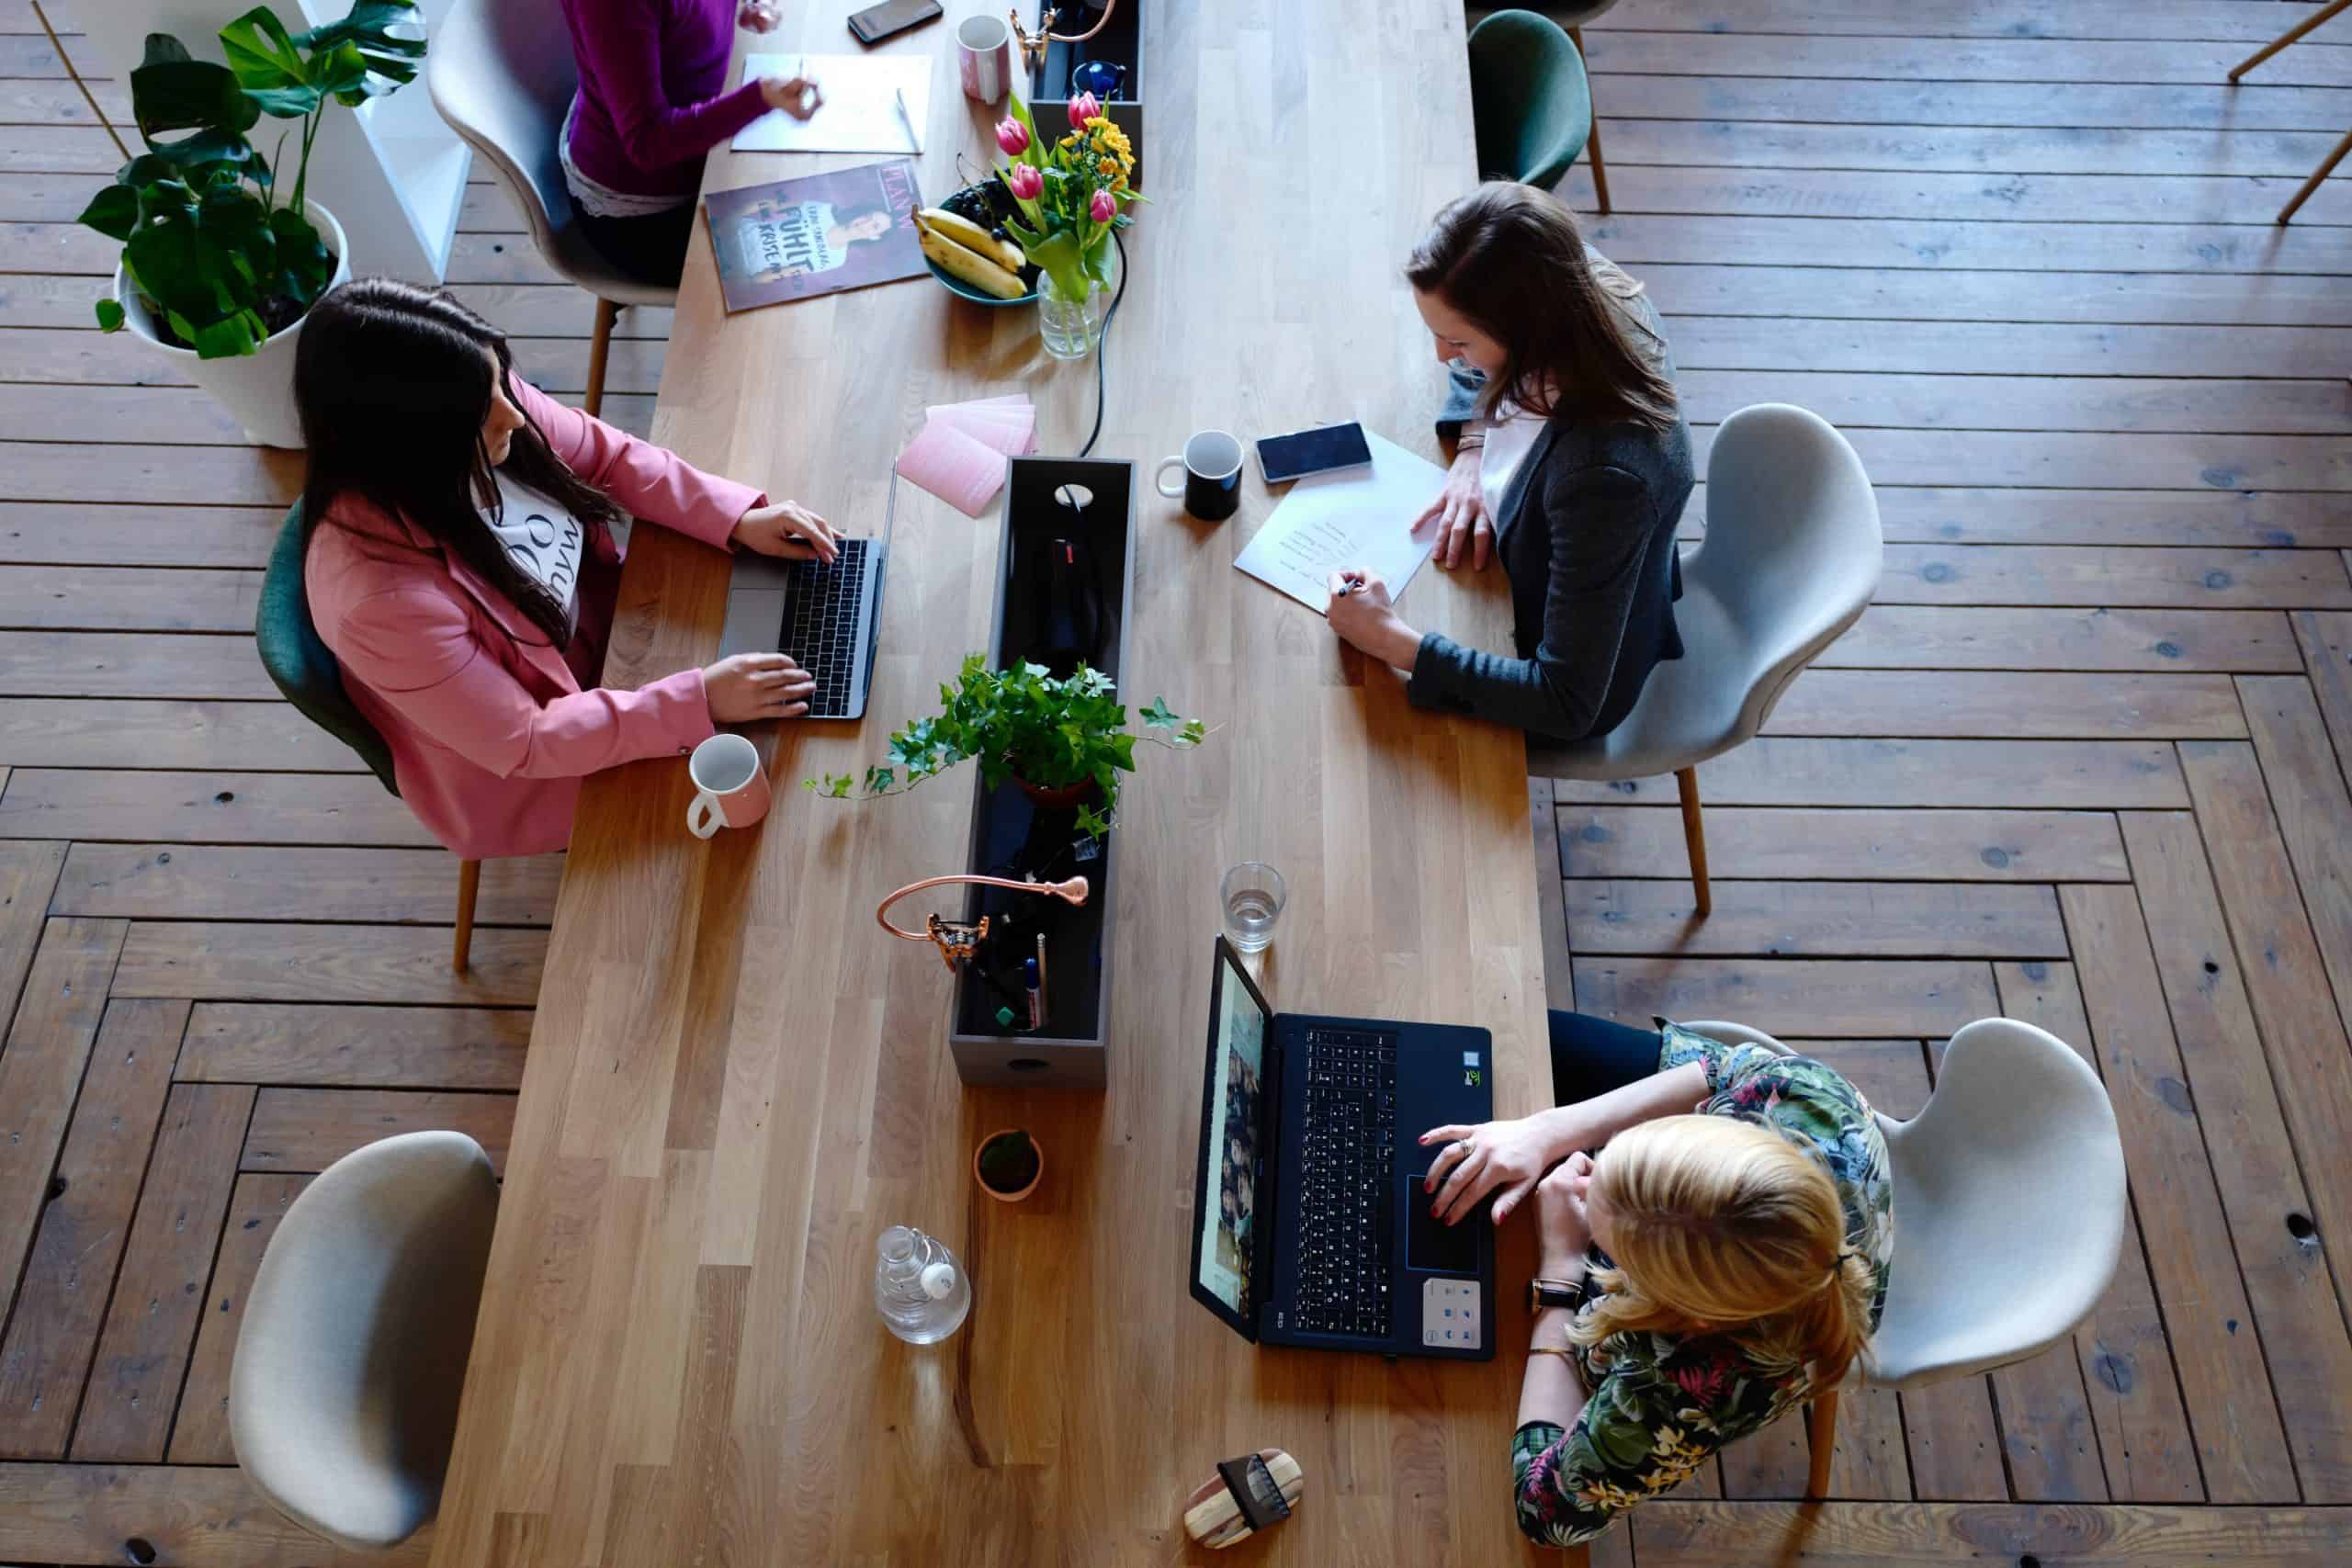 Women at a coworking space